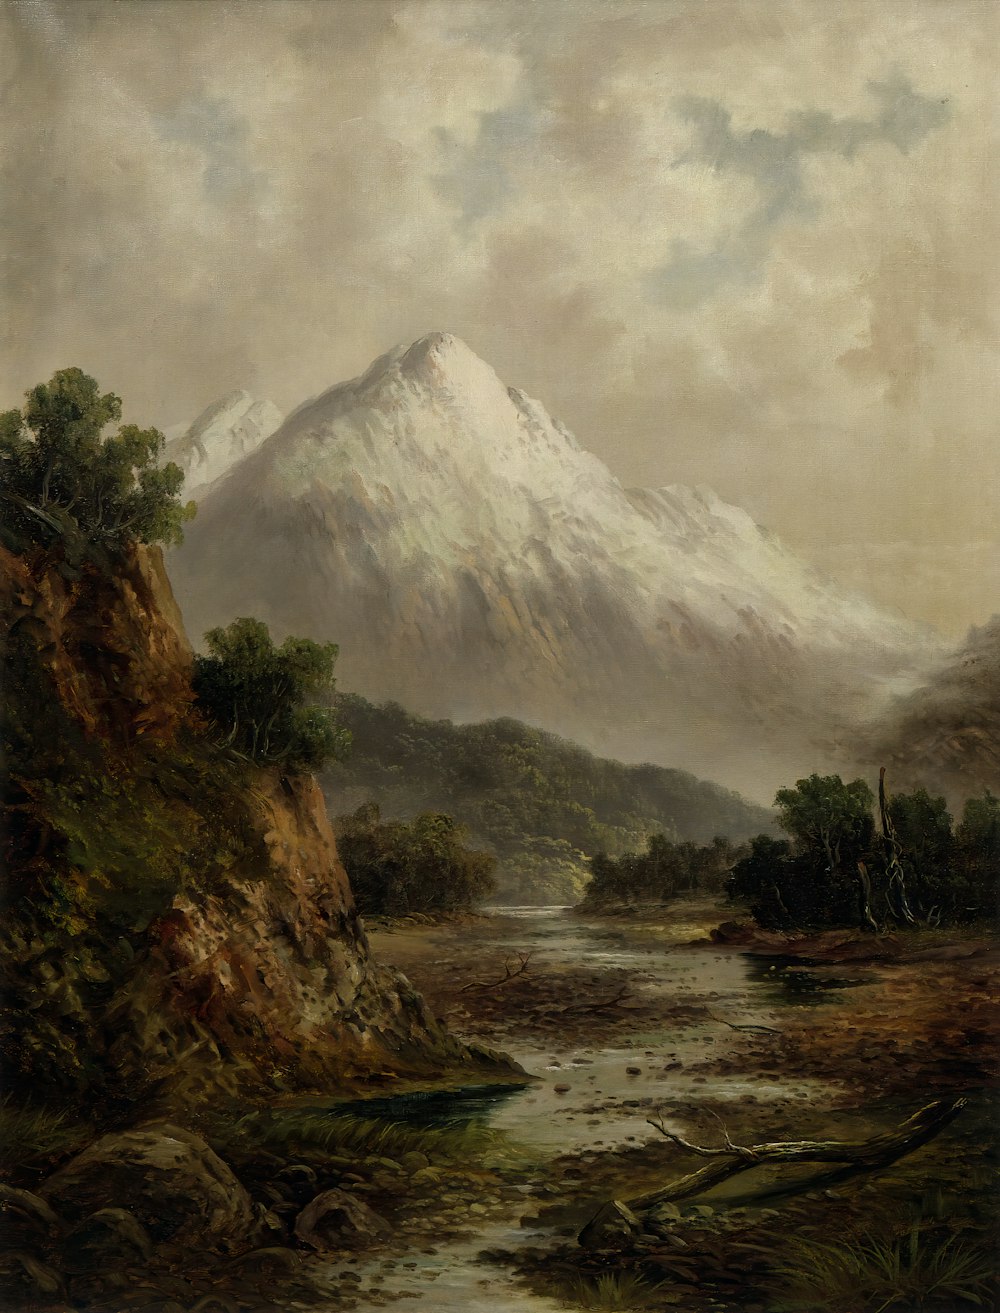 a painting of a mountain with a river running through it